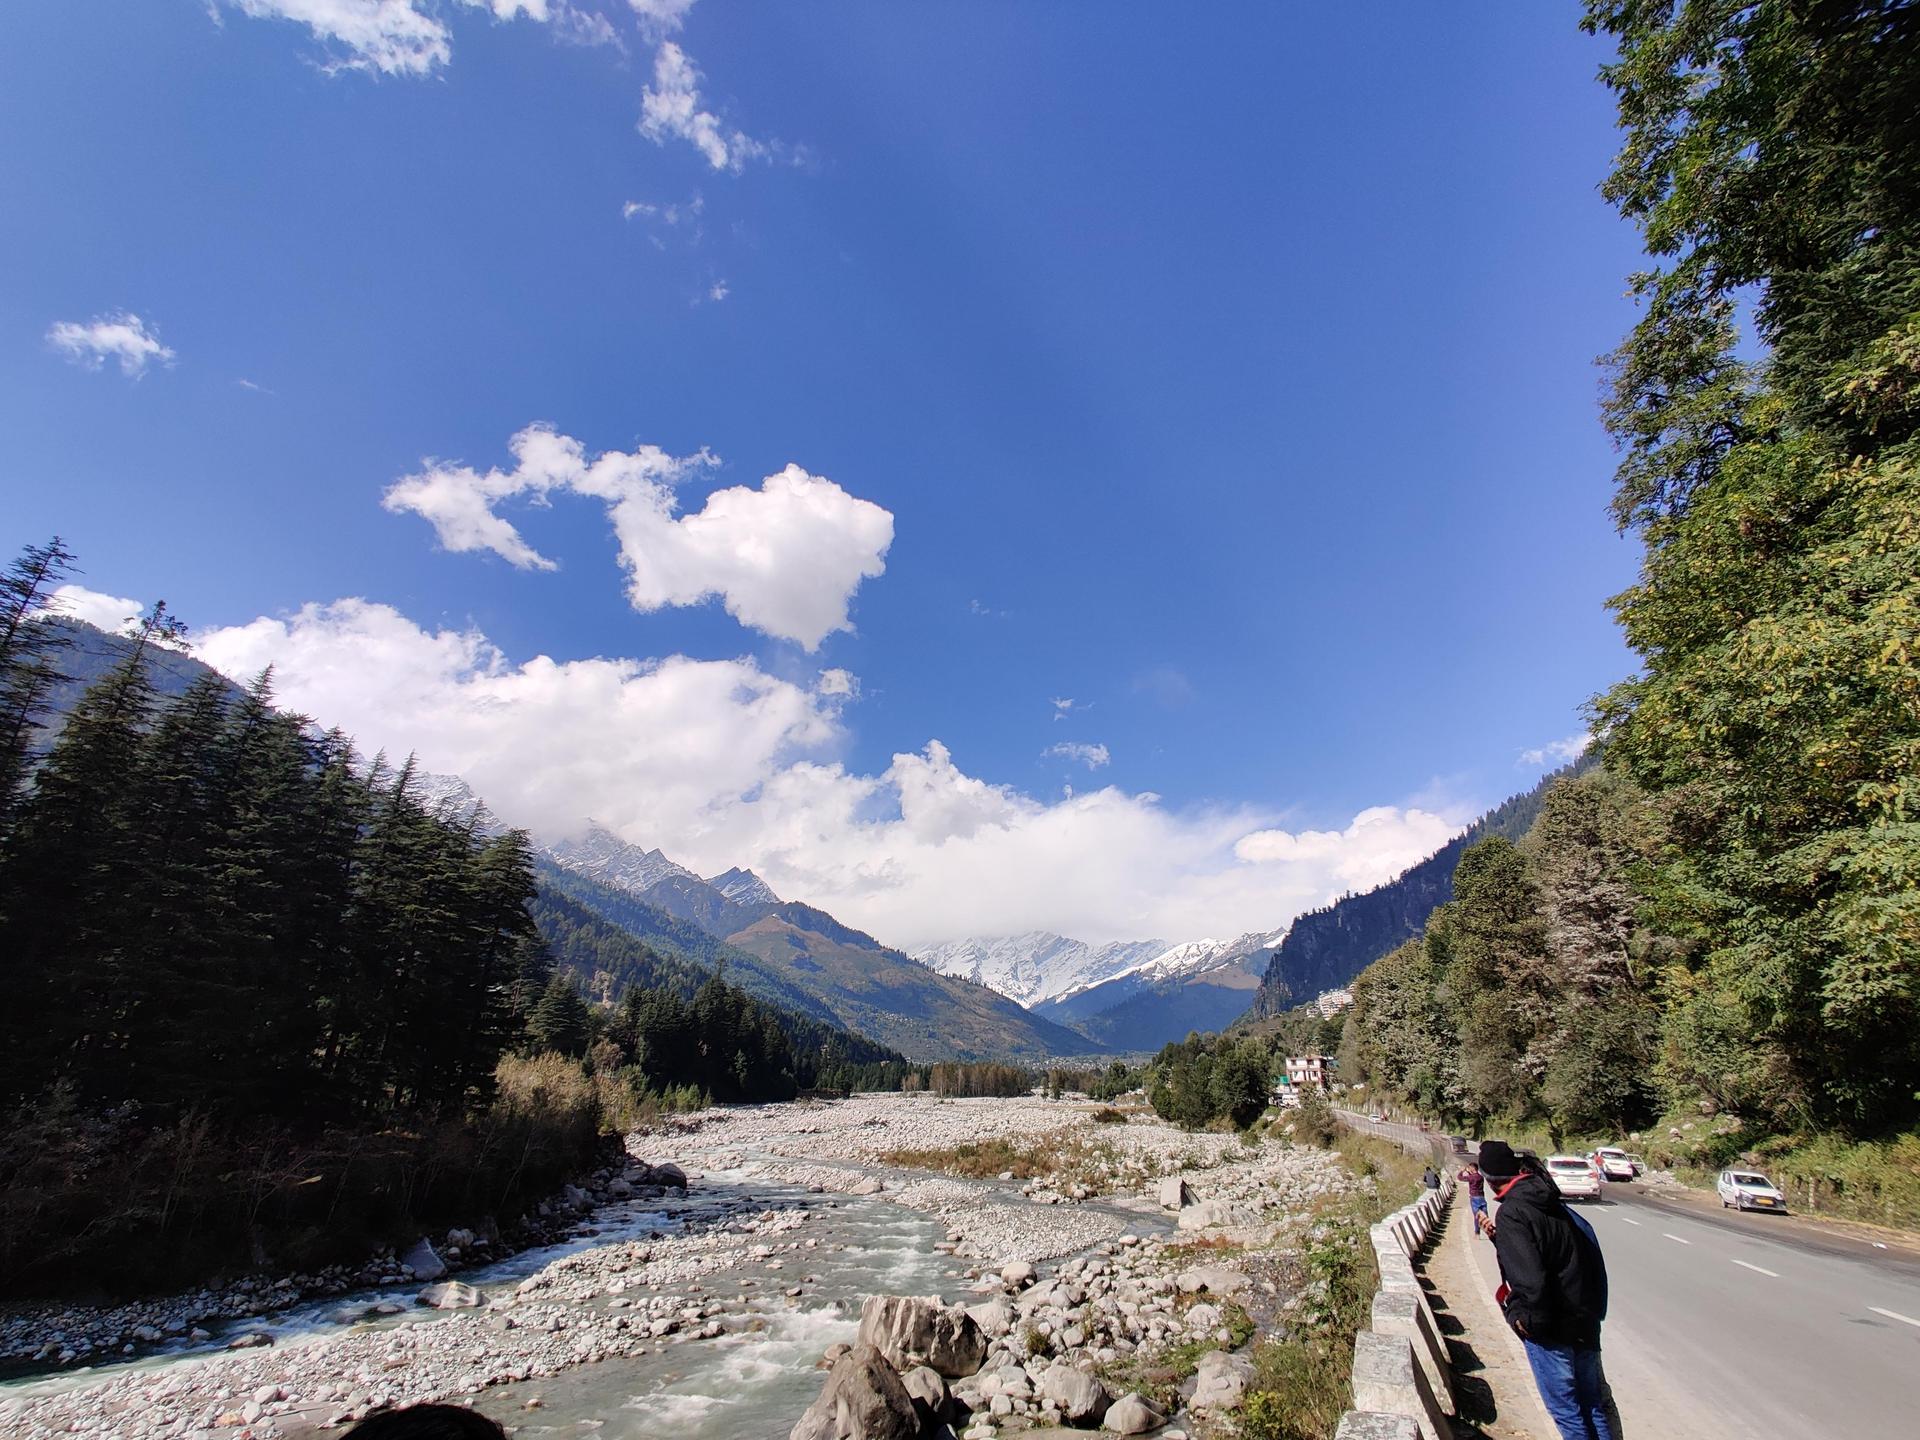 My two weeks vacation in Manali